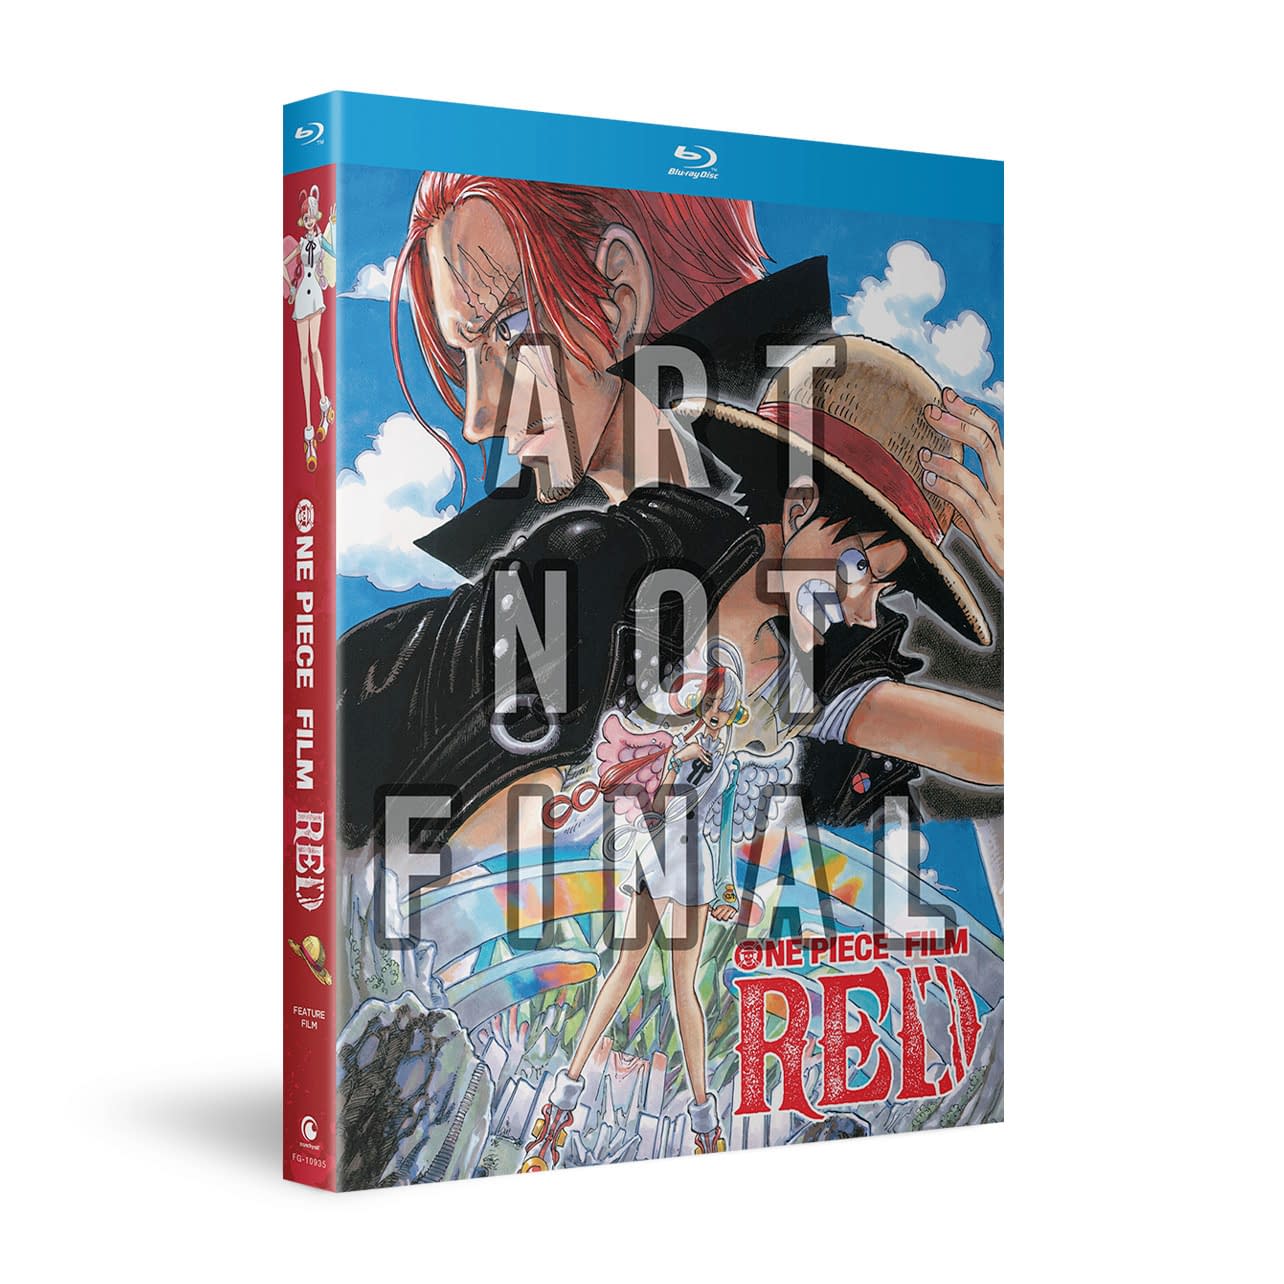 One Piece Film Red Ends Its Run as the 4th Highest Grossing Anime Film of  All Time Worldwide - Crunchyroll News